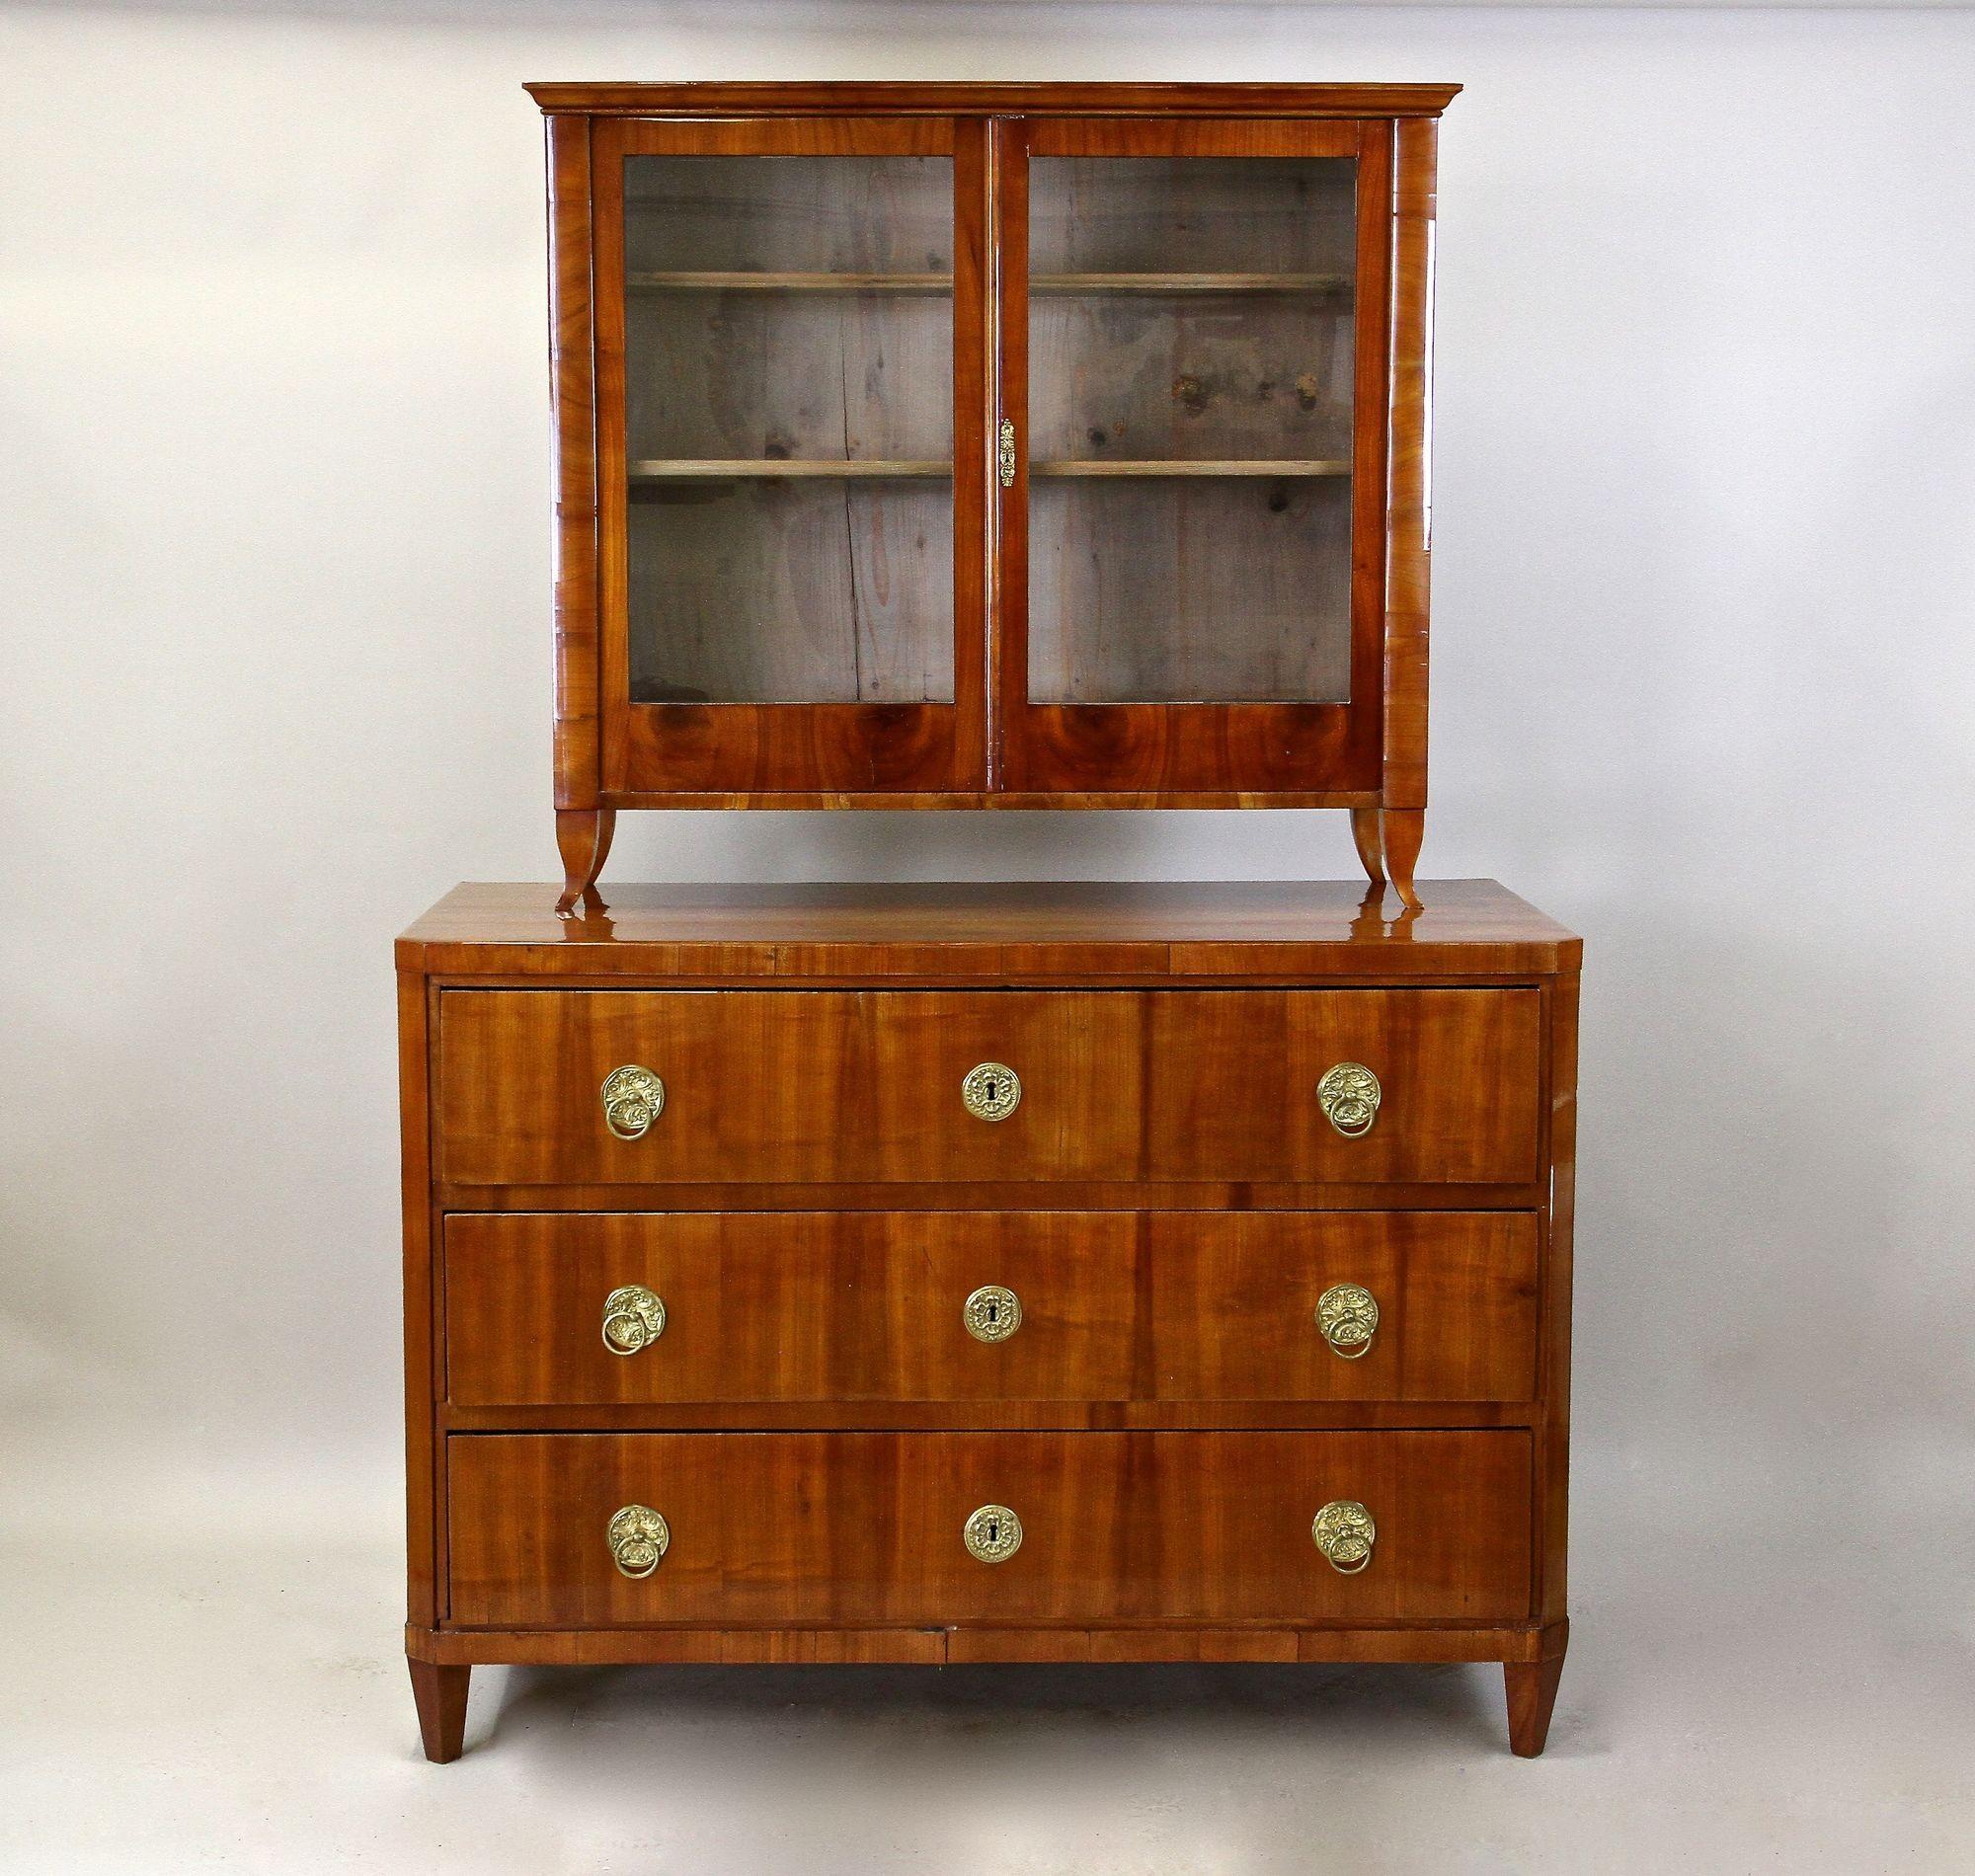 Lovely, old restored 19th century Biedermeier chest of drawers or buffet from the early period around 1830 in Austria. This beautiful three drawer commode impresses with its thick cherrywood veneered surface showing a gorgeous looking grain flowing